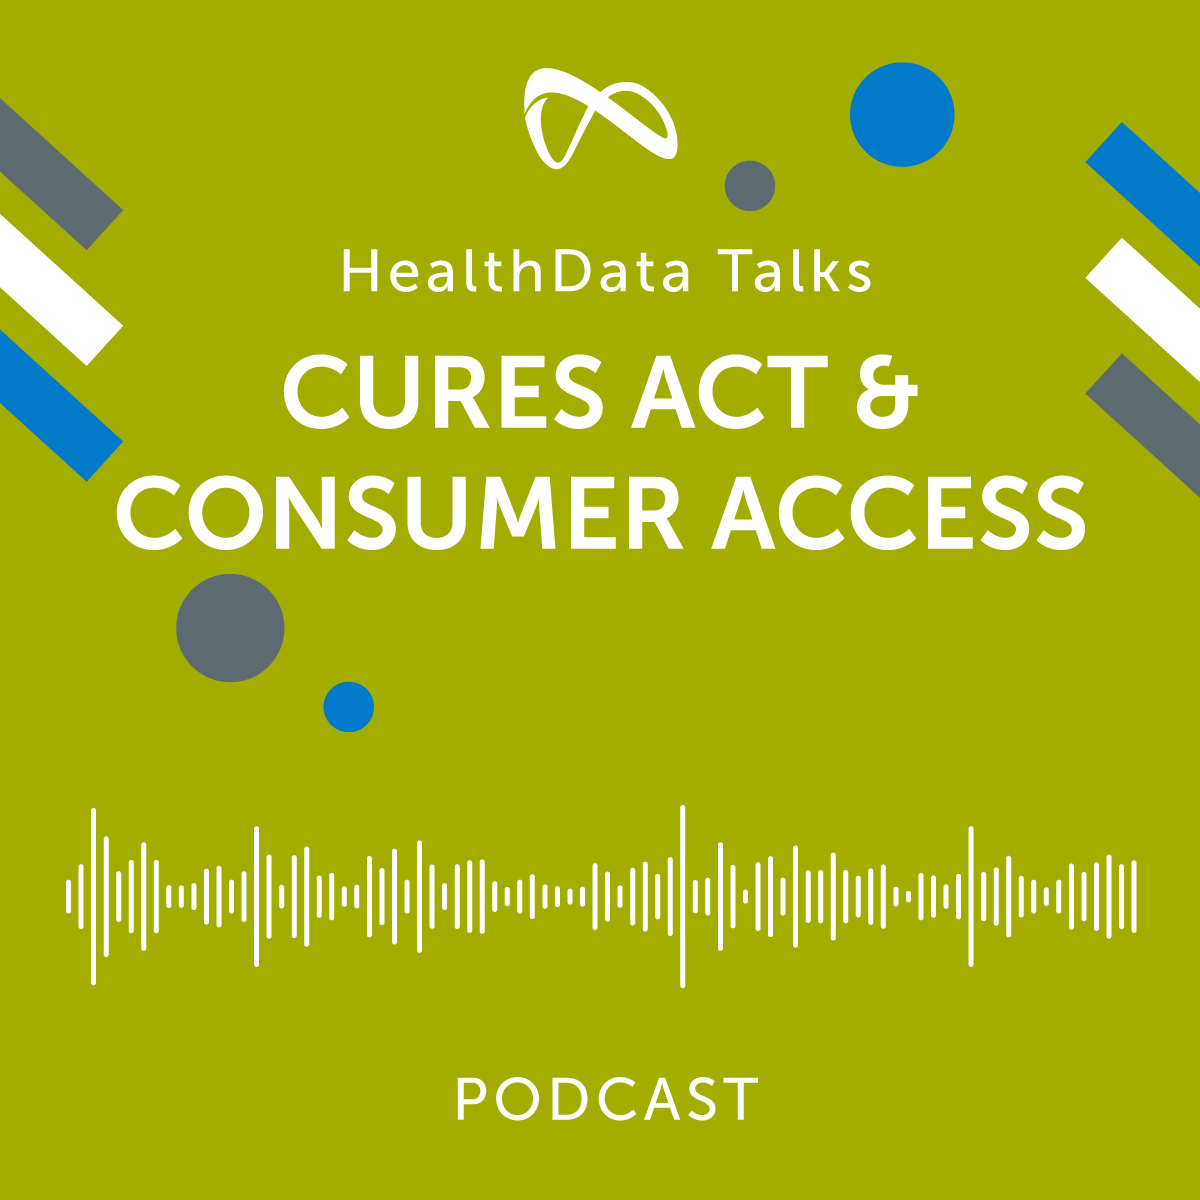 Cures Act & Consumer Access